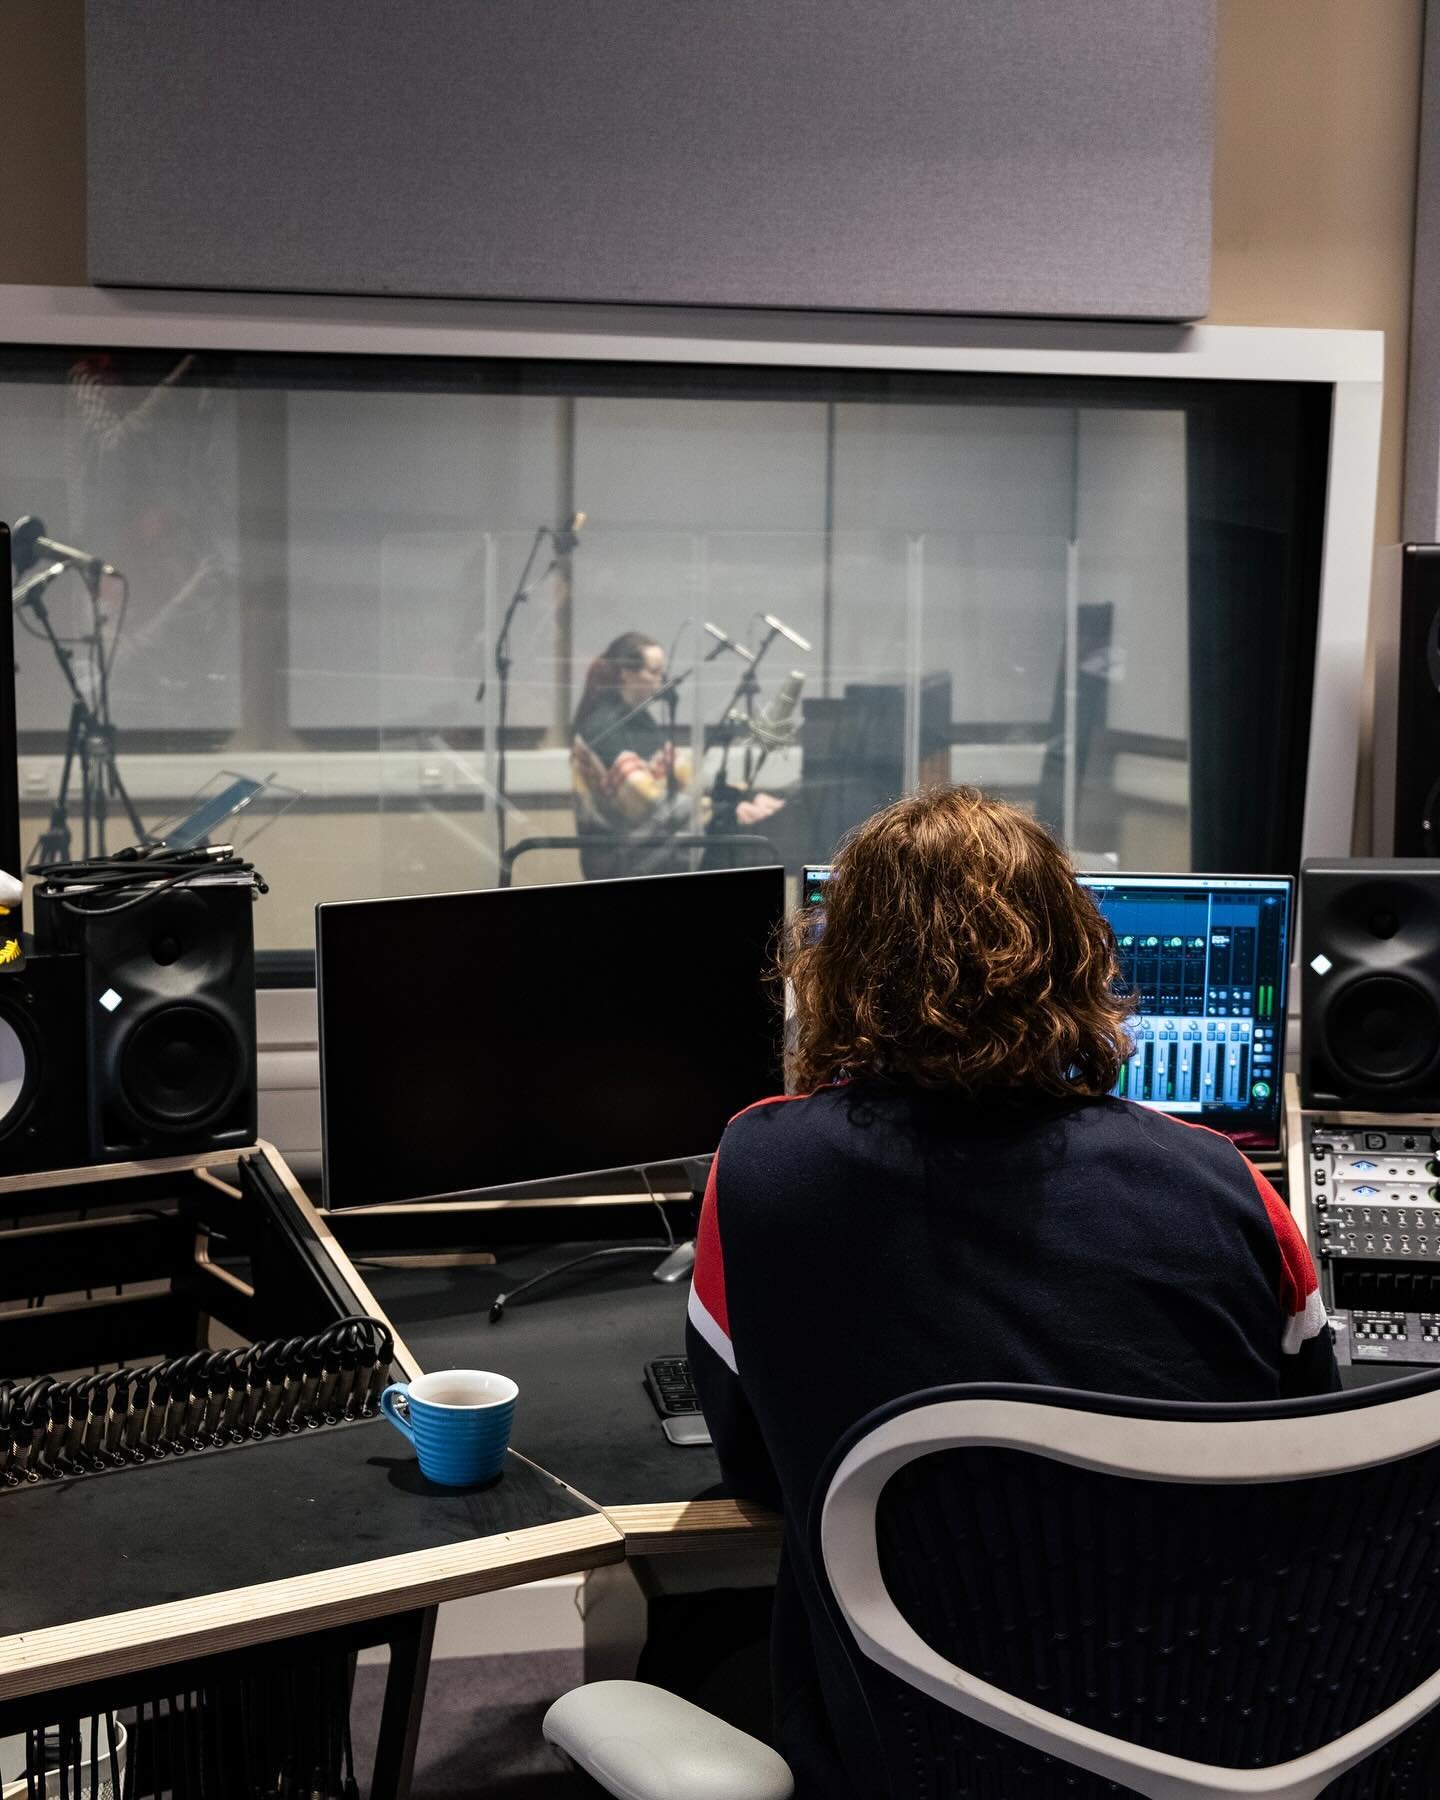 GET YOURSELF BOOKED IN FOR MAY

🎹 @julianedeil_music 
🎸 @_alfiedean 
📸 @jessfonti.jpg 

RECORDING ~ PRODUCING ~ MIXING ~ ARRANGING ~ COMPOSITION

#climax #productionstudio #recordingstudio #recordingstudios #musicrecording #recordingmusic #musicma